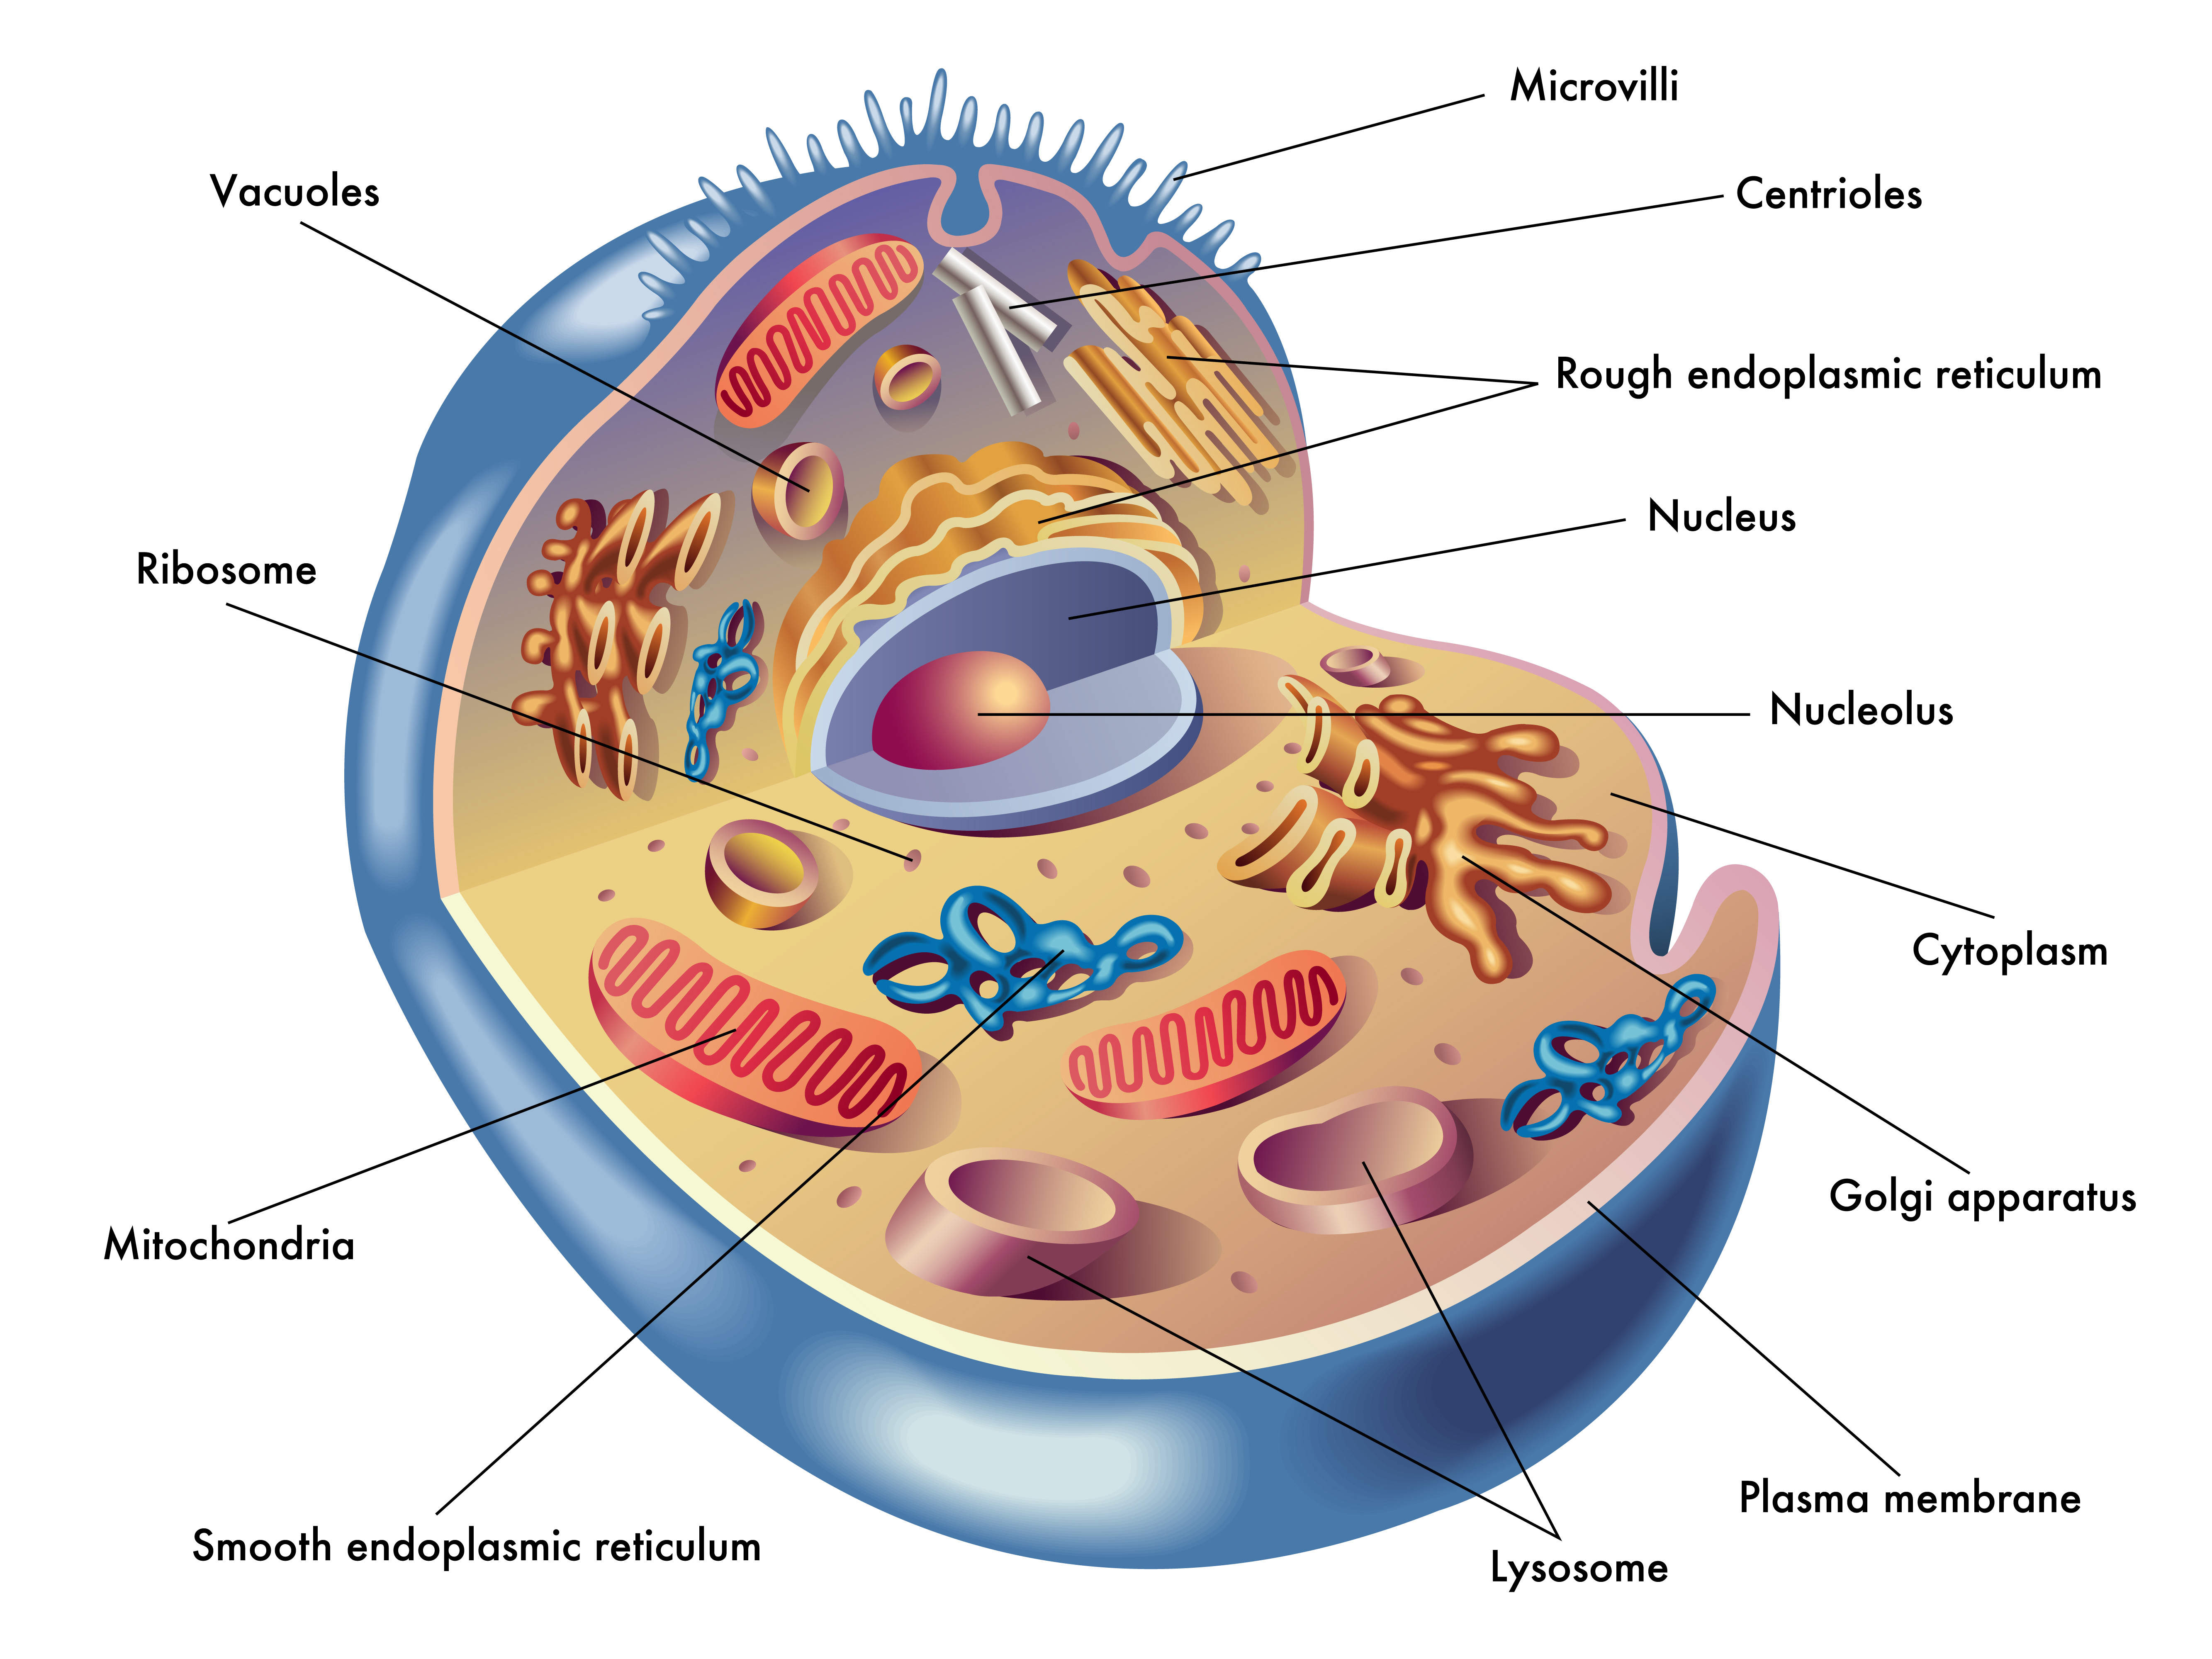 Why Don't I Have Any Energy? All about your mitochondria